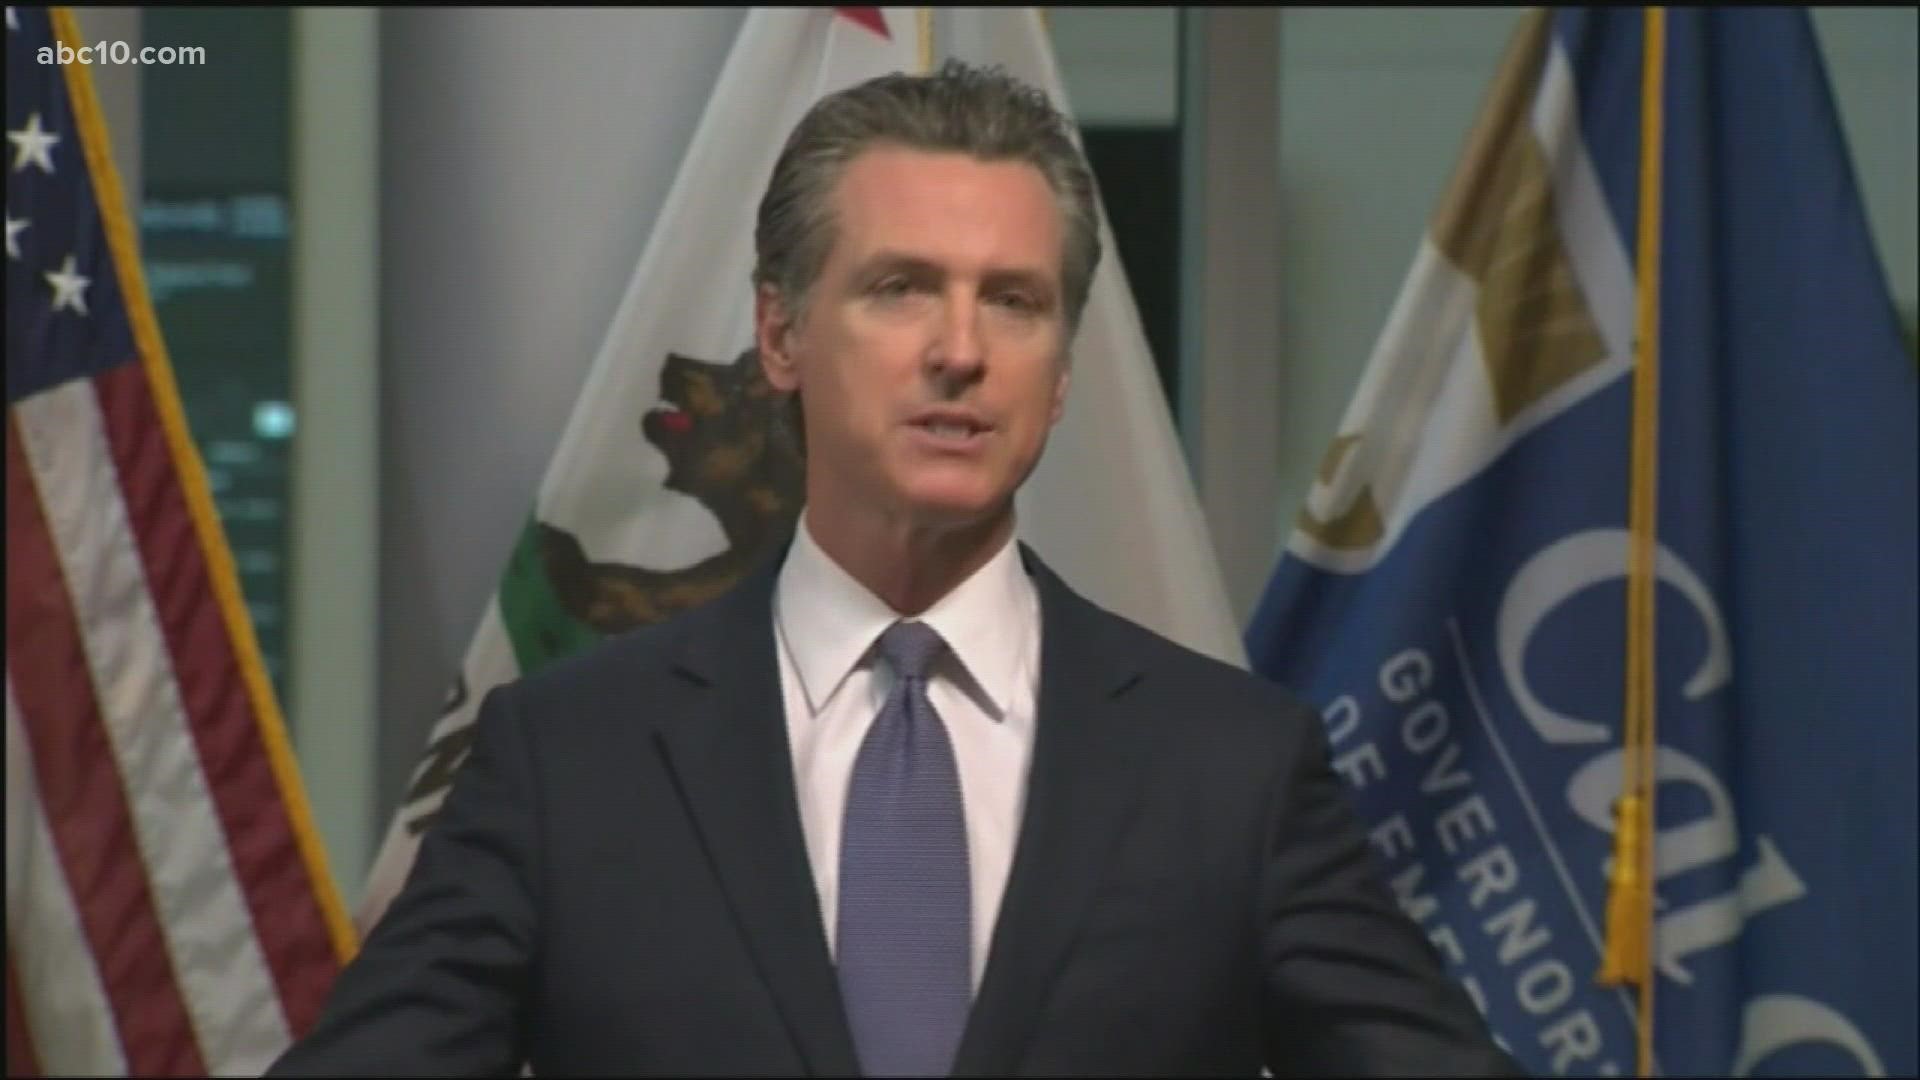 Rescue California called for Newsom to end his emergency powers. Newsom’s office said the remaining provisions will help with a future surge.